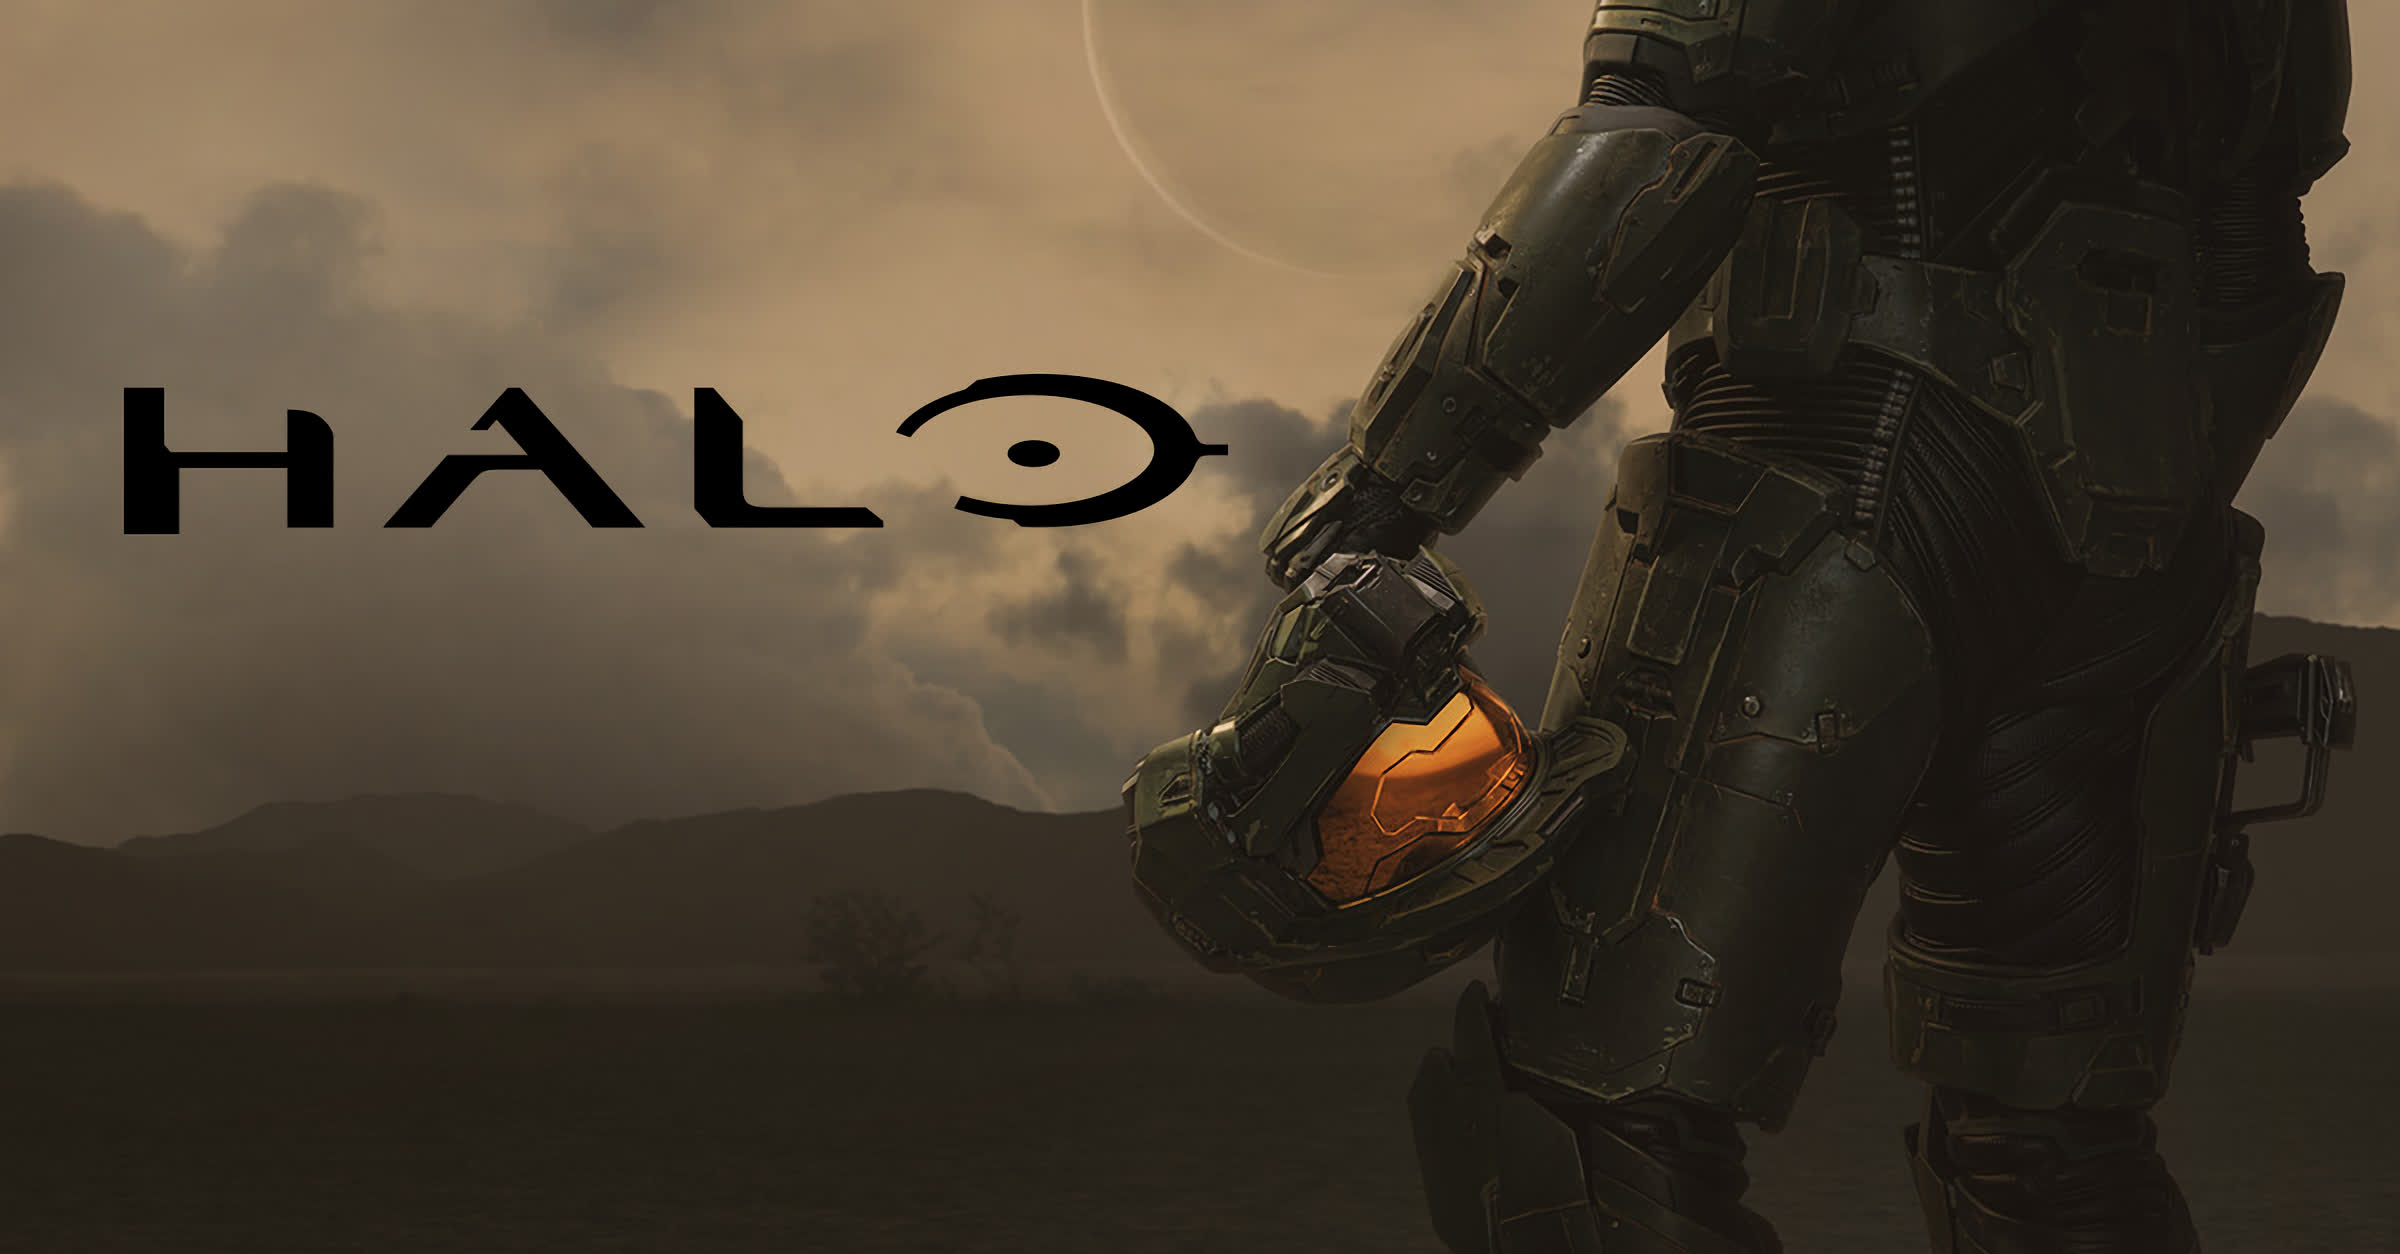 Halo's original music composers are suing Microsoft over unpaid royalties